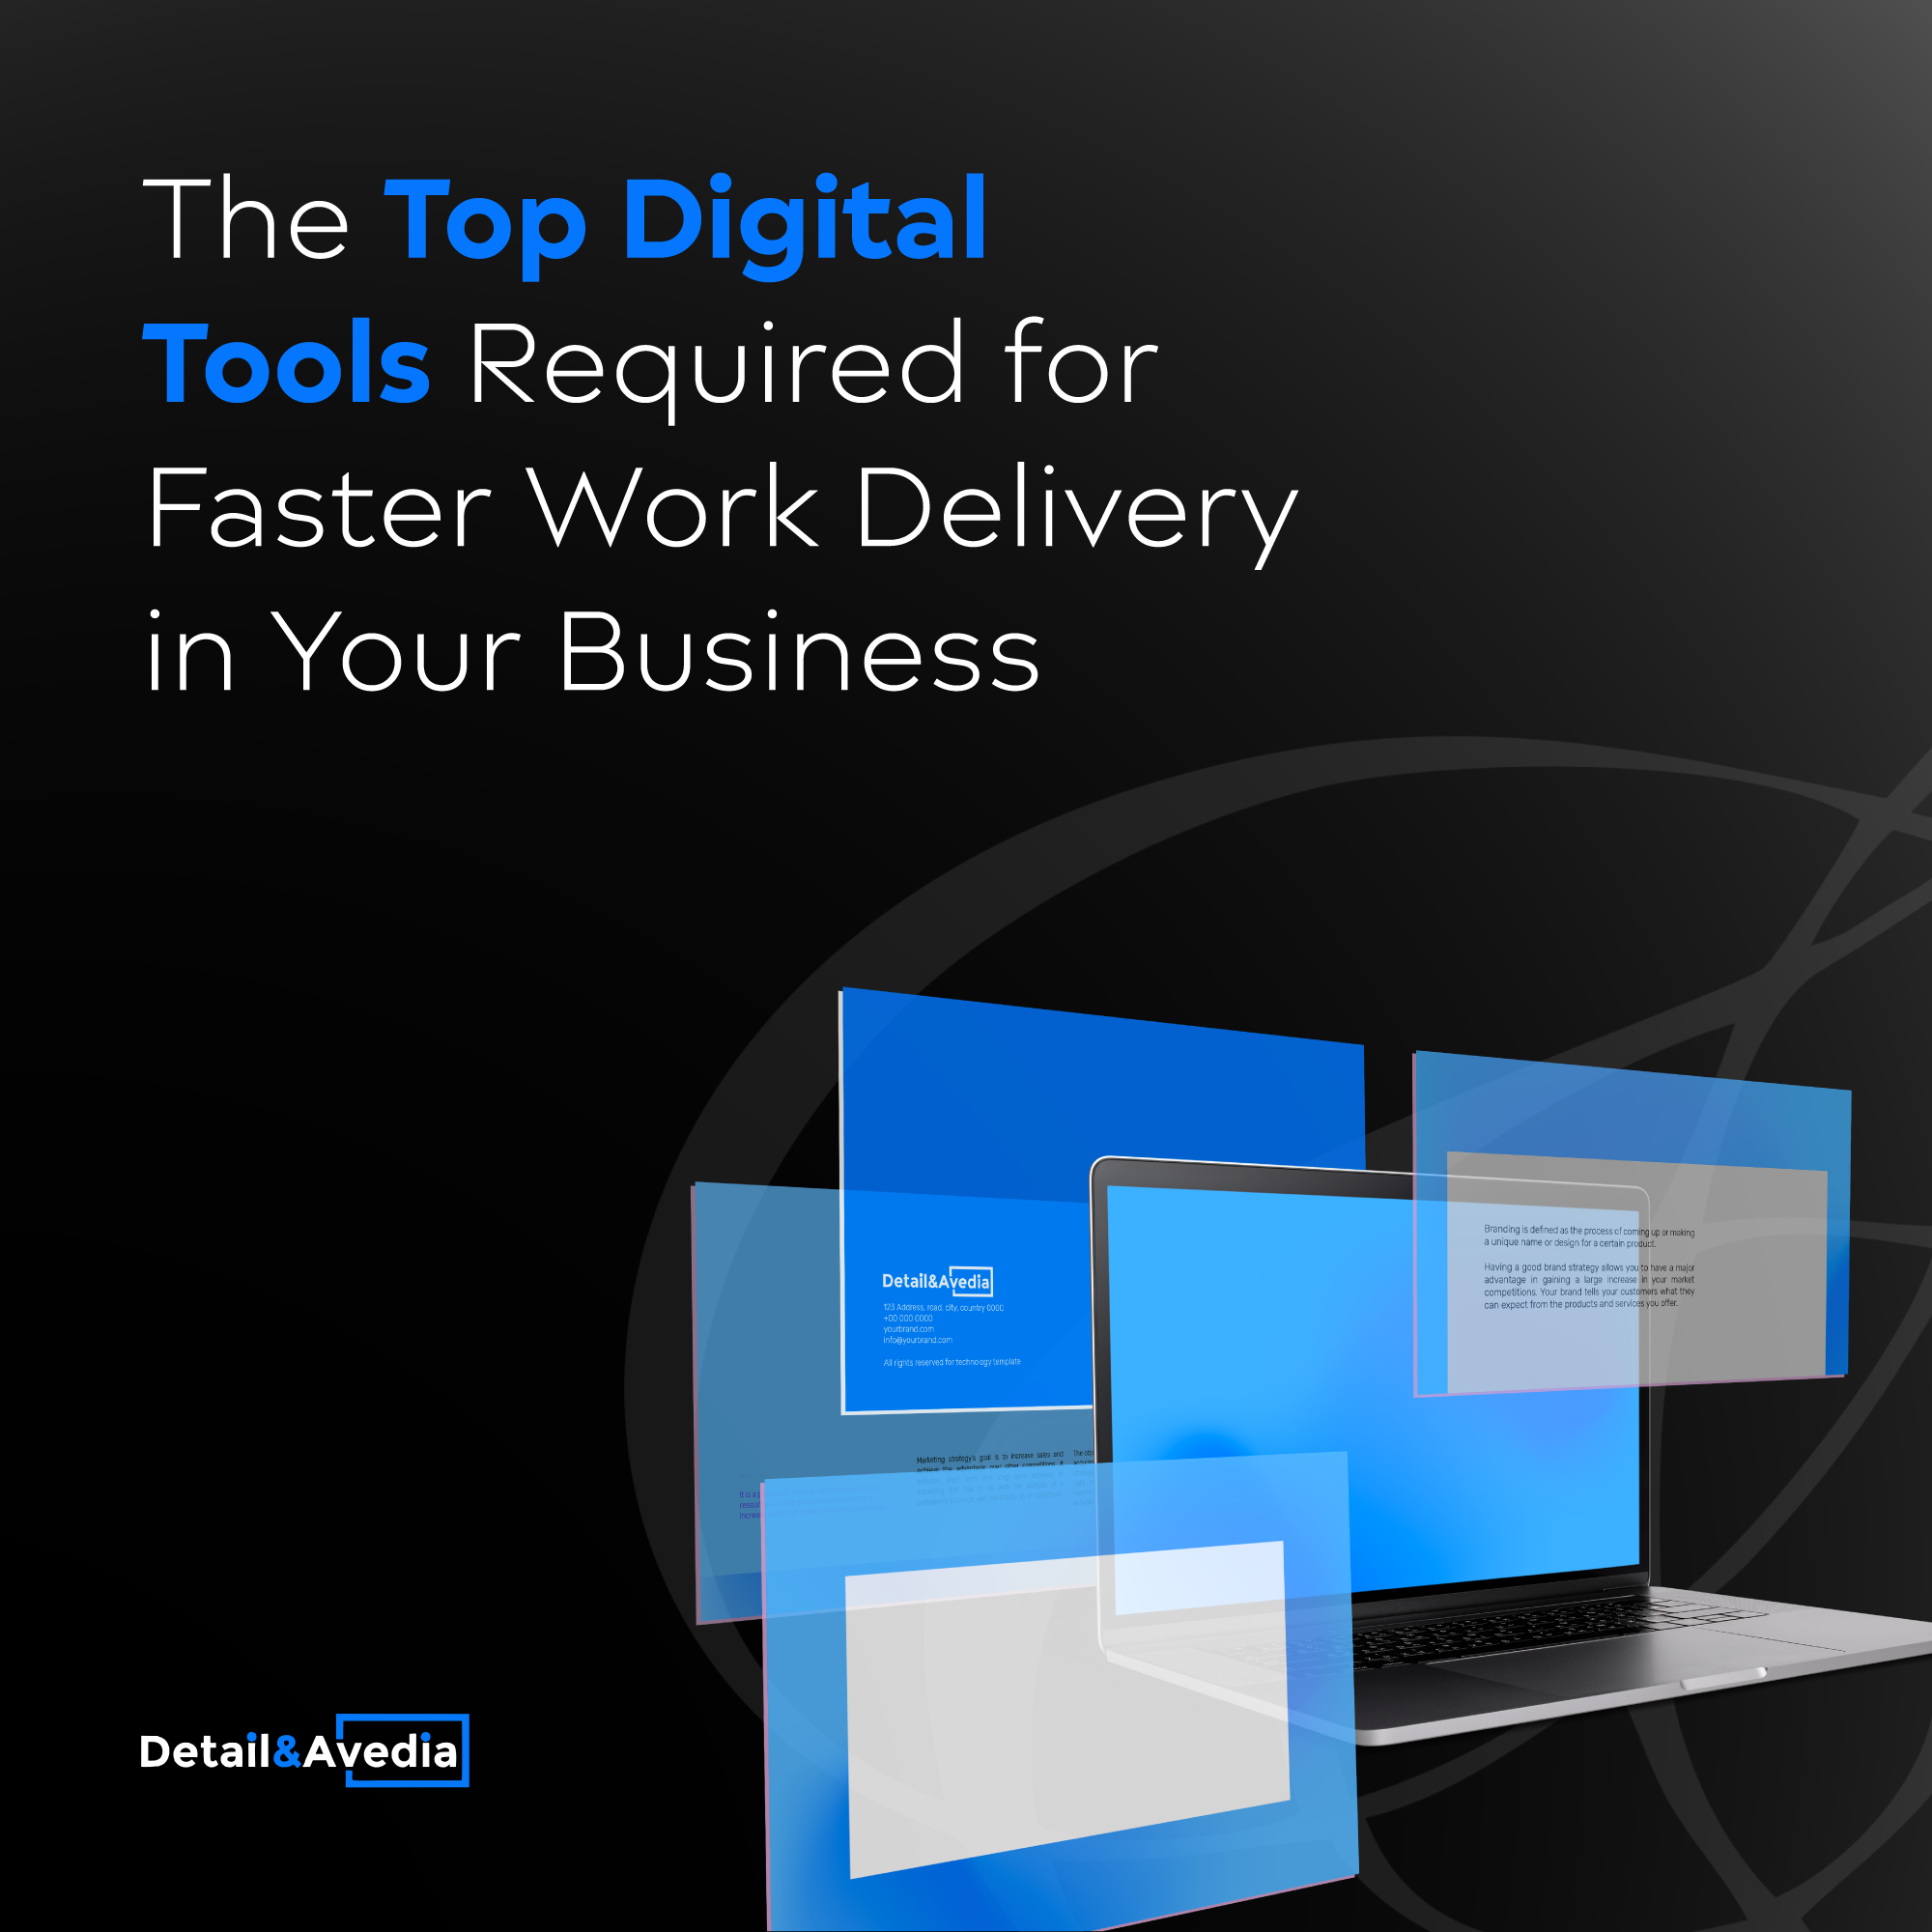 The Top Digital Tools Required for Faster Work Delivery in Your Business